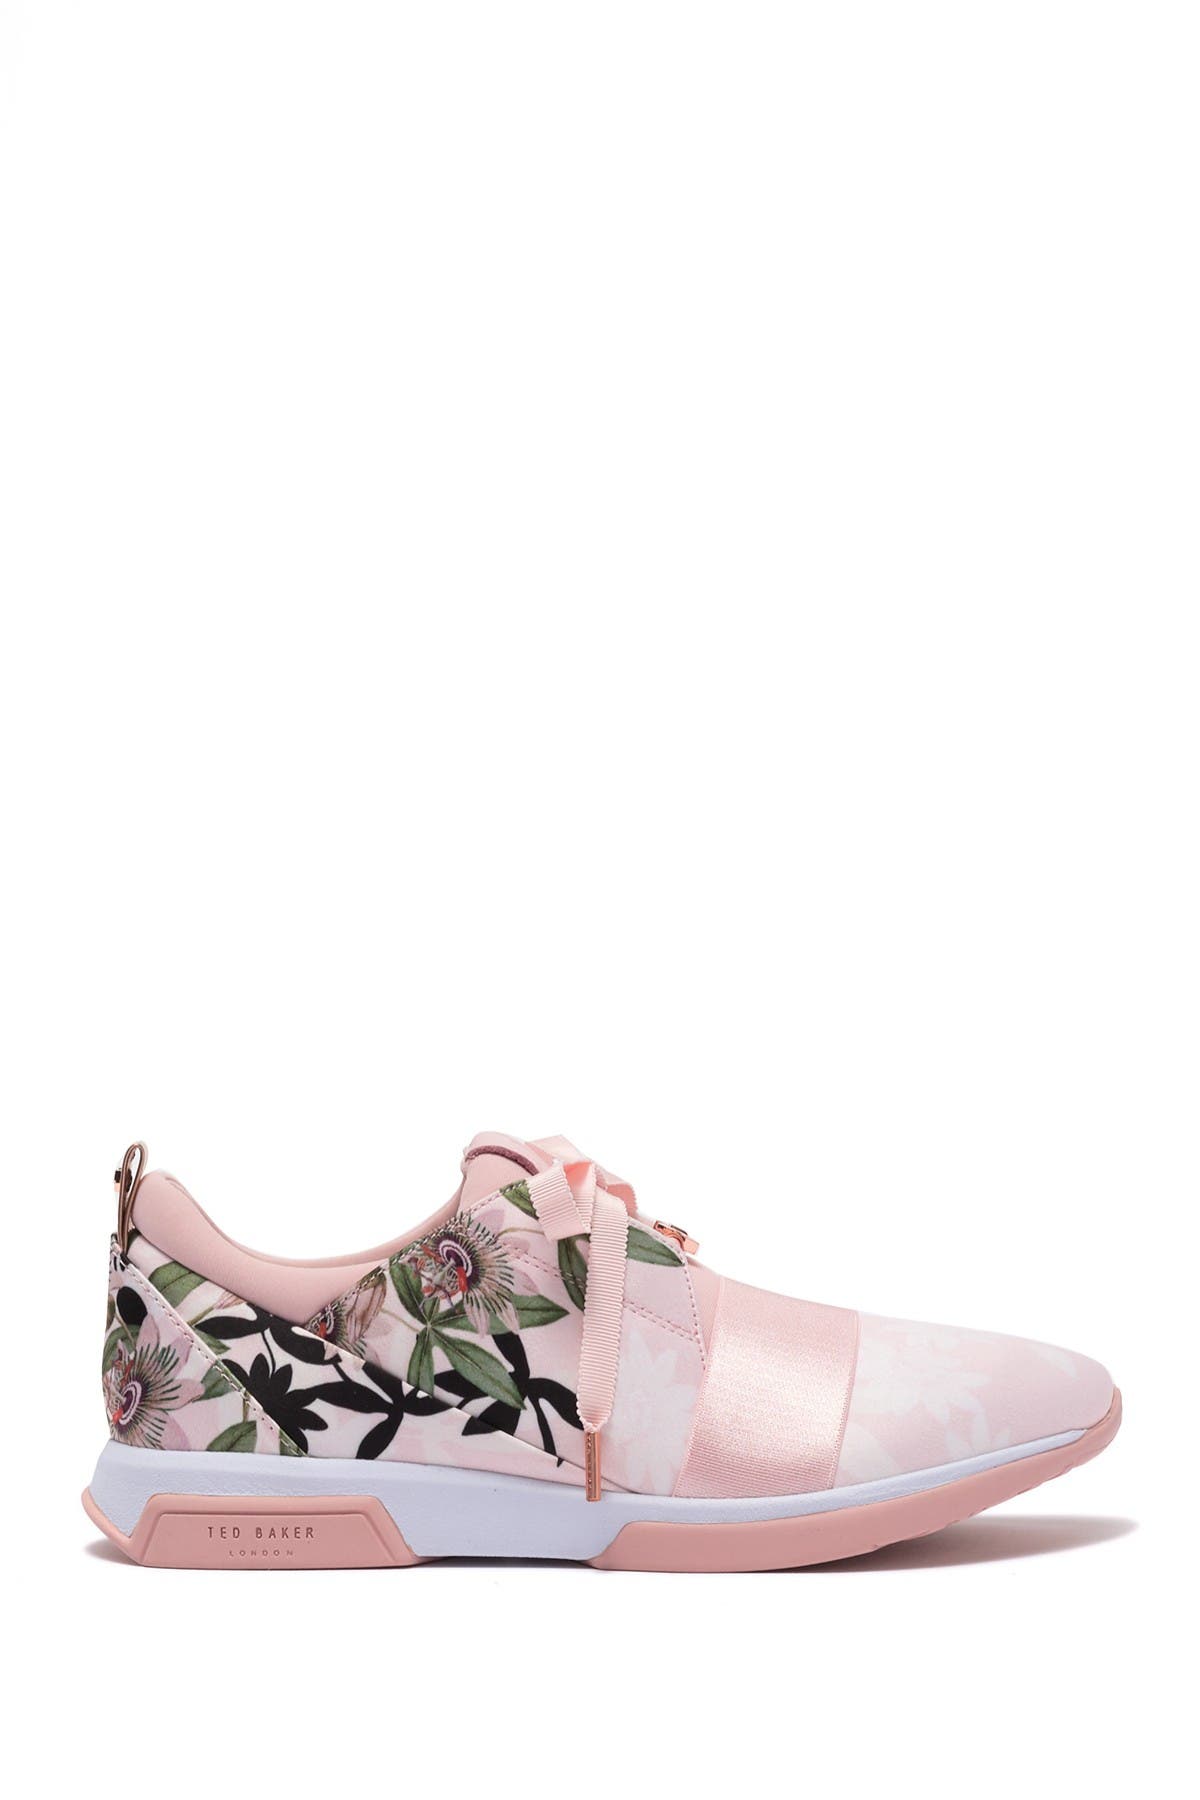 ted baker sneakers review